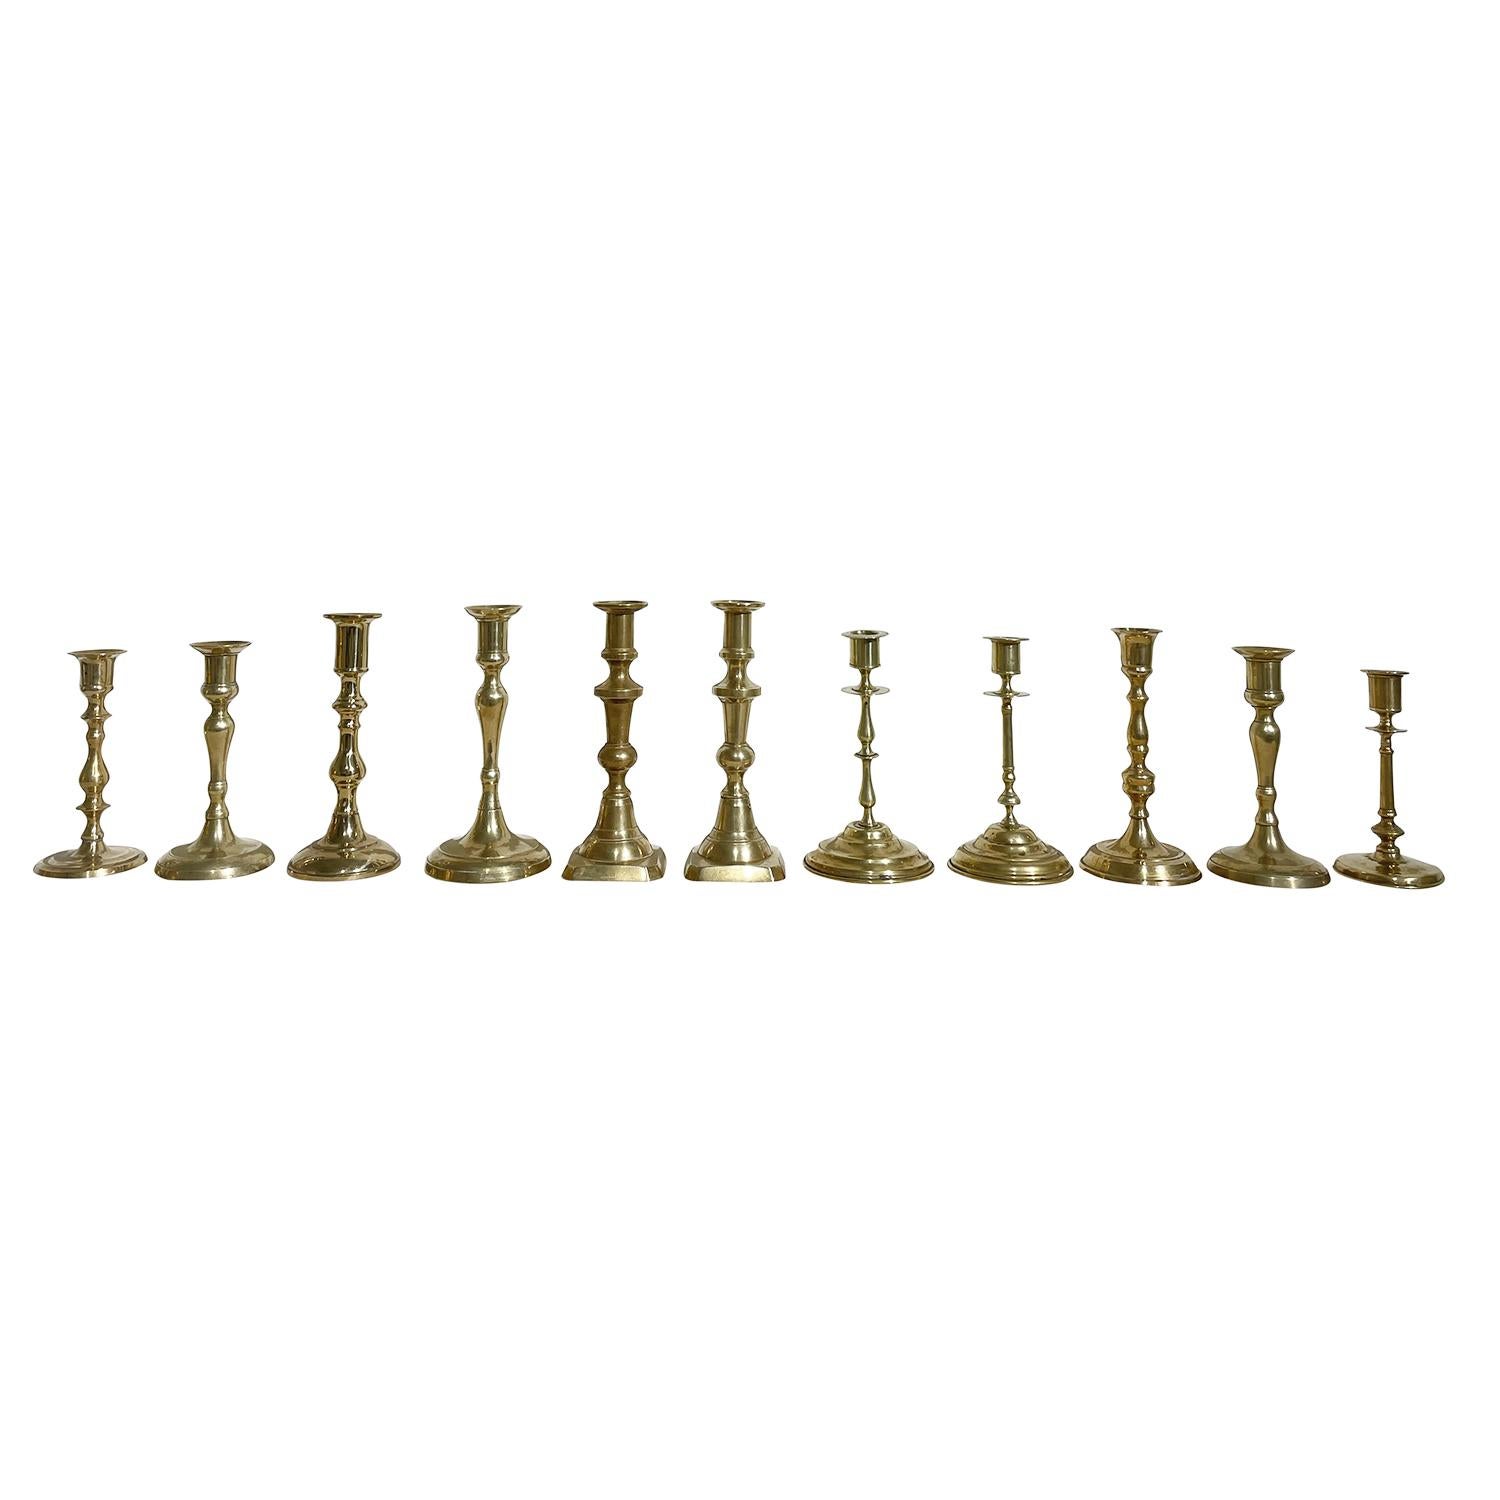 A gold, vintage Swedish Gustavian similar set of eleven candle holders made of hand crafted brass, in good condition. The Scandinavian candlesticks, stands are enhanced by derail craft art. Wear consistent with age and use. circa 1960 - 1980,